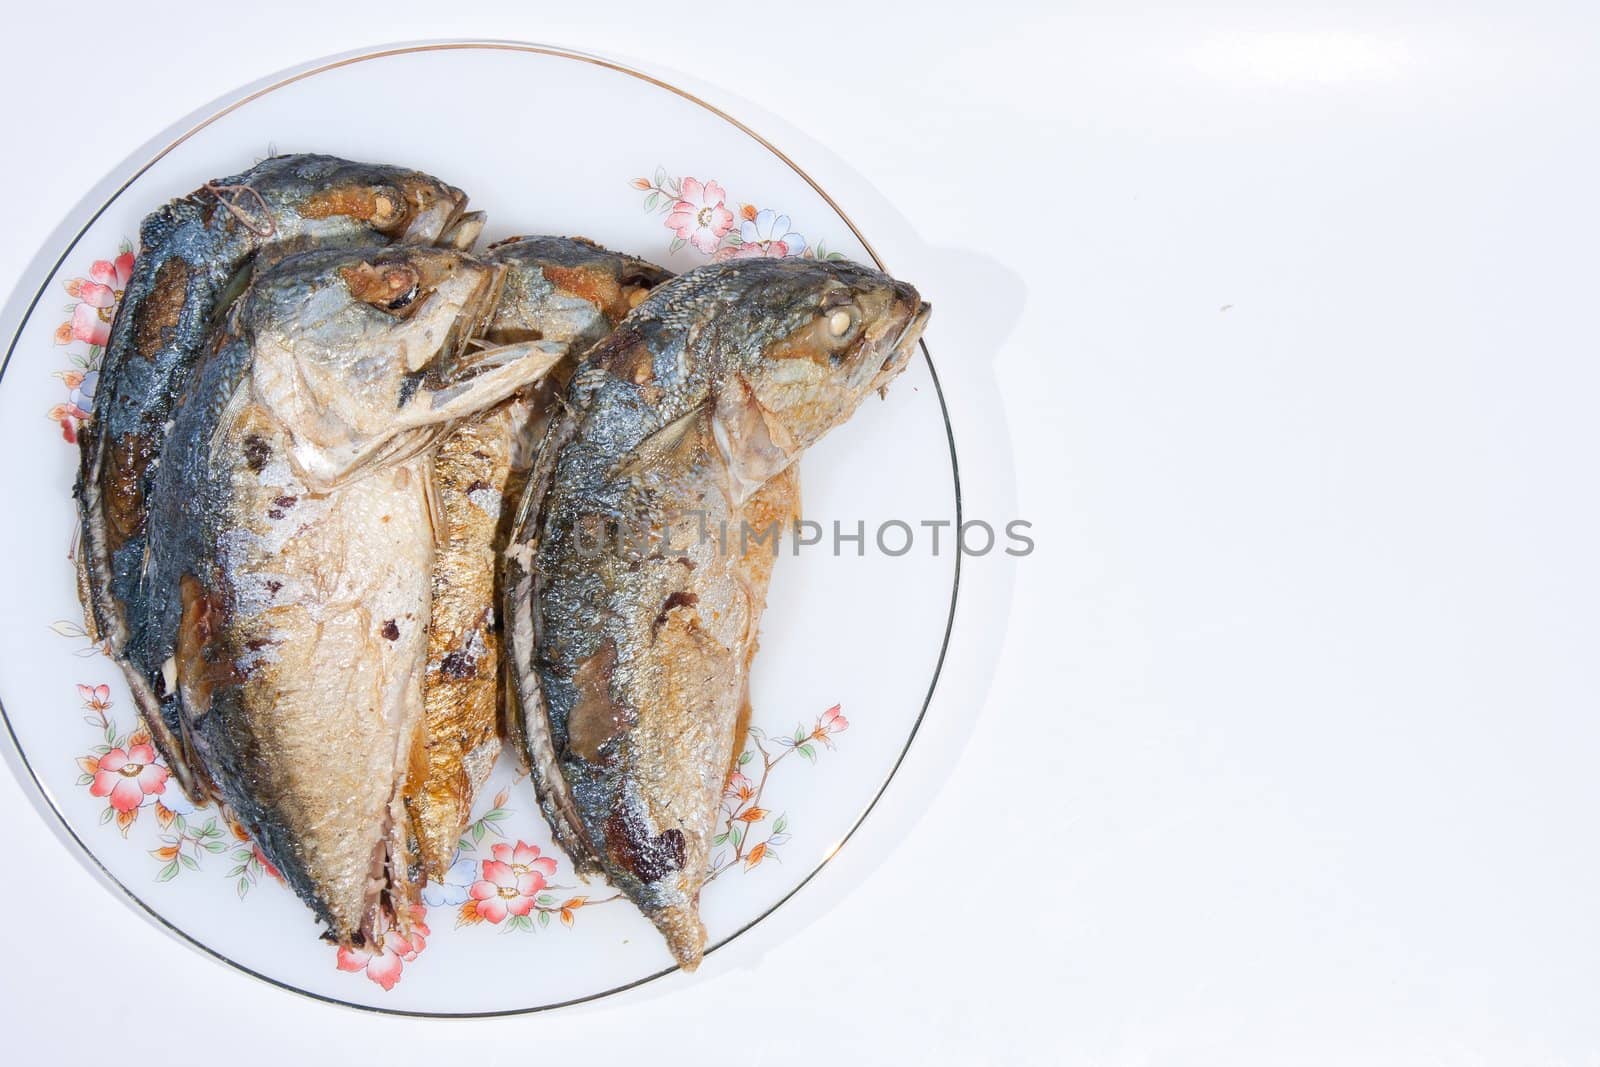 Division Two fish fry held on the plate insert. On a white background.